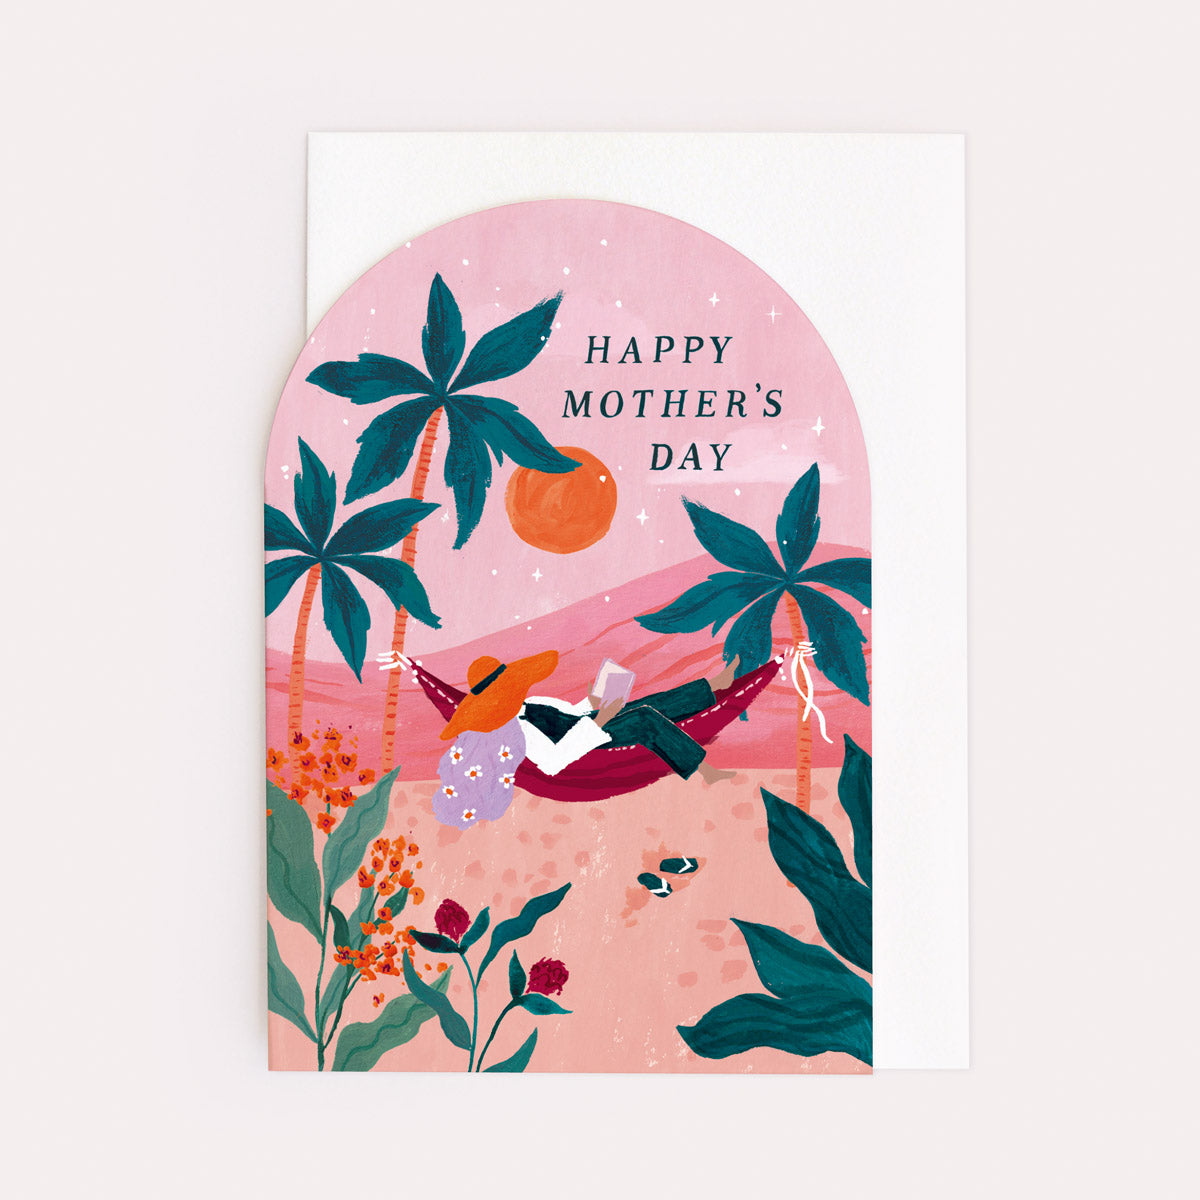 I feel relieved when my mother is happy Mother's Day Sunset Card